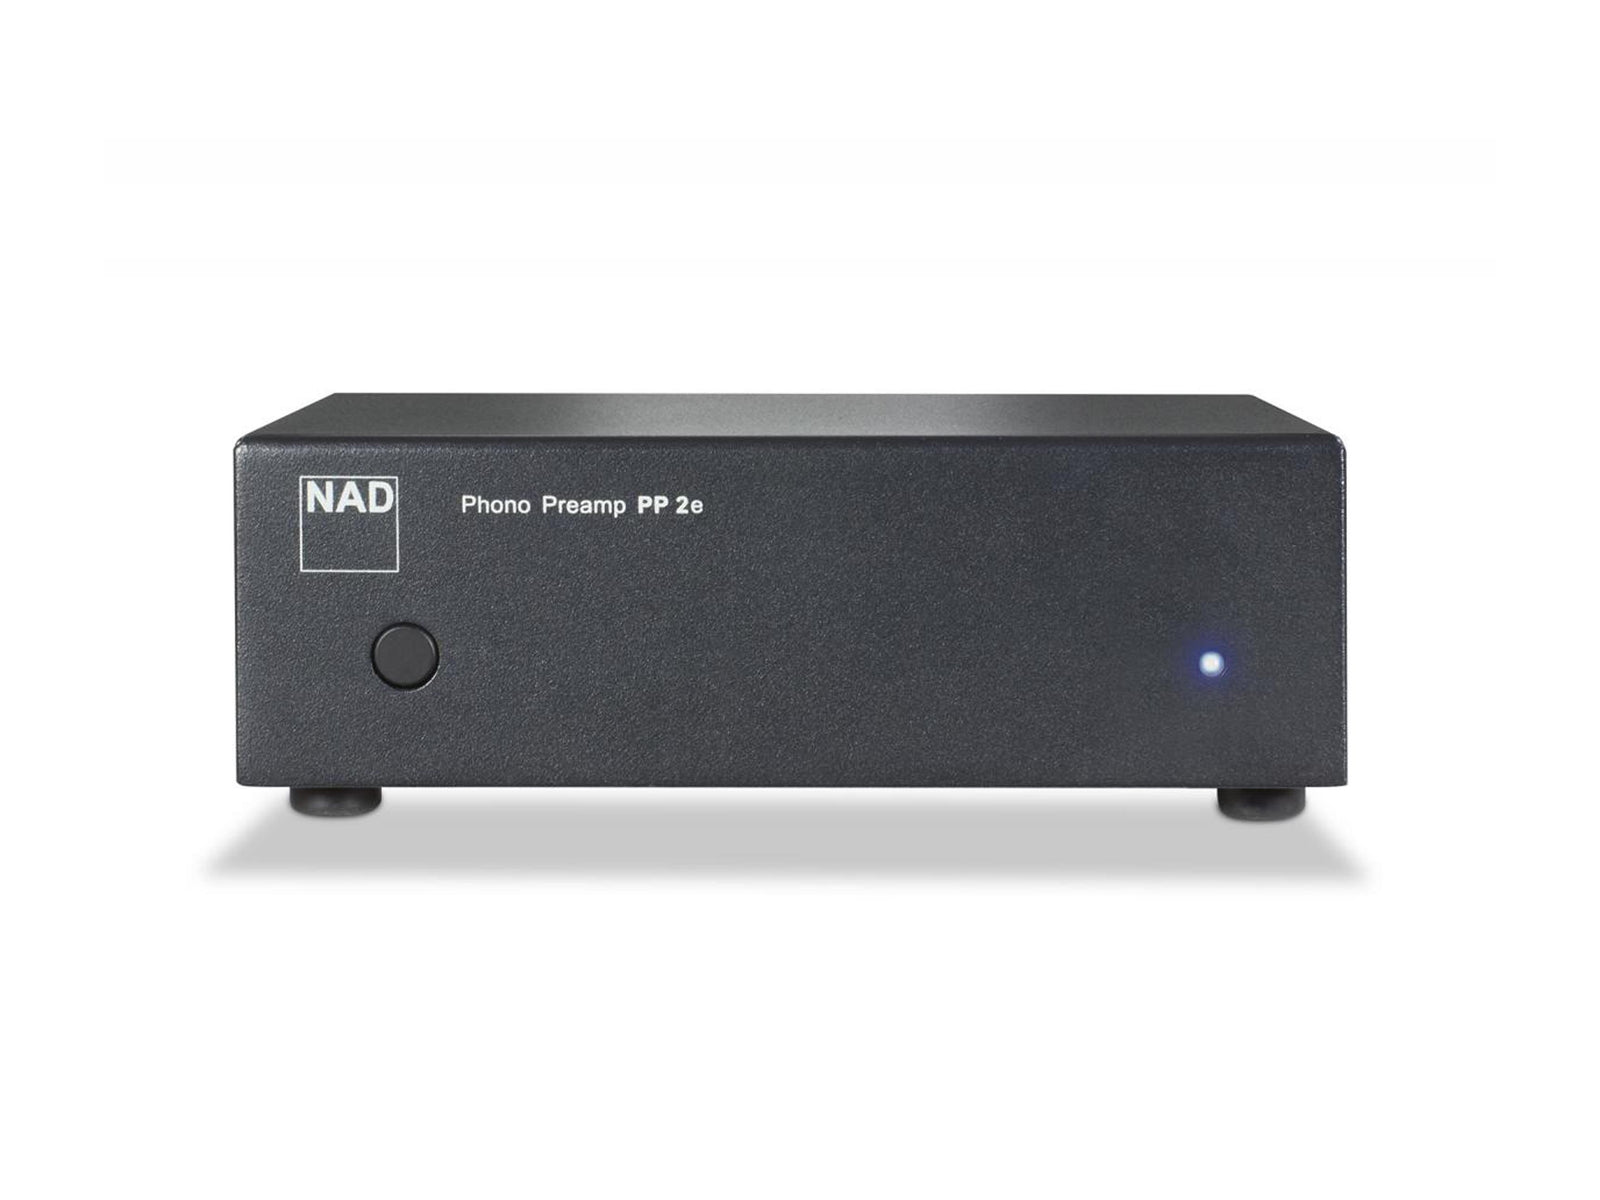 NAD PP2e PHONO PREAMPLIFIER - Best price on all NAD Electronics High Performance Hi-Fi and Home Theatre at Vinyl Sound, music and hi-fi apps including AV receivers, Music Streamers, Amplifiers models C 399 - C 700 - M10 V2 - C 316BEE V2 - C 368 - D 3045..., NAD Electronics Audio/Video components for Home Theatre products, Integrated Amplifiers C 700 NEW BluOS Streaming Amplifiers, NAD Electronics Masters Series…